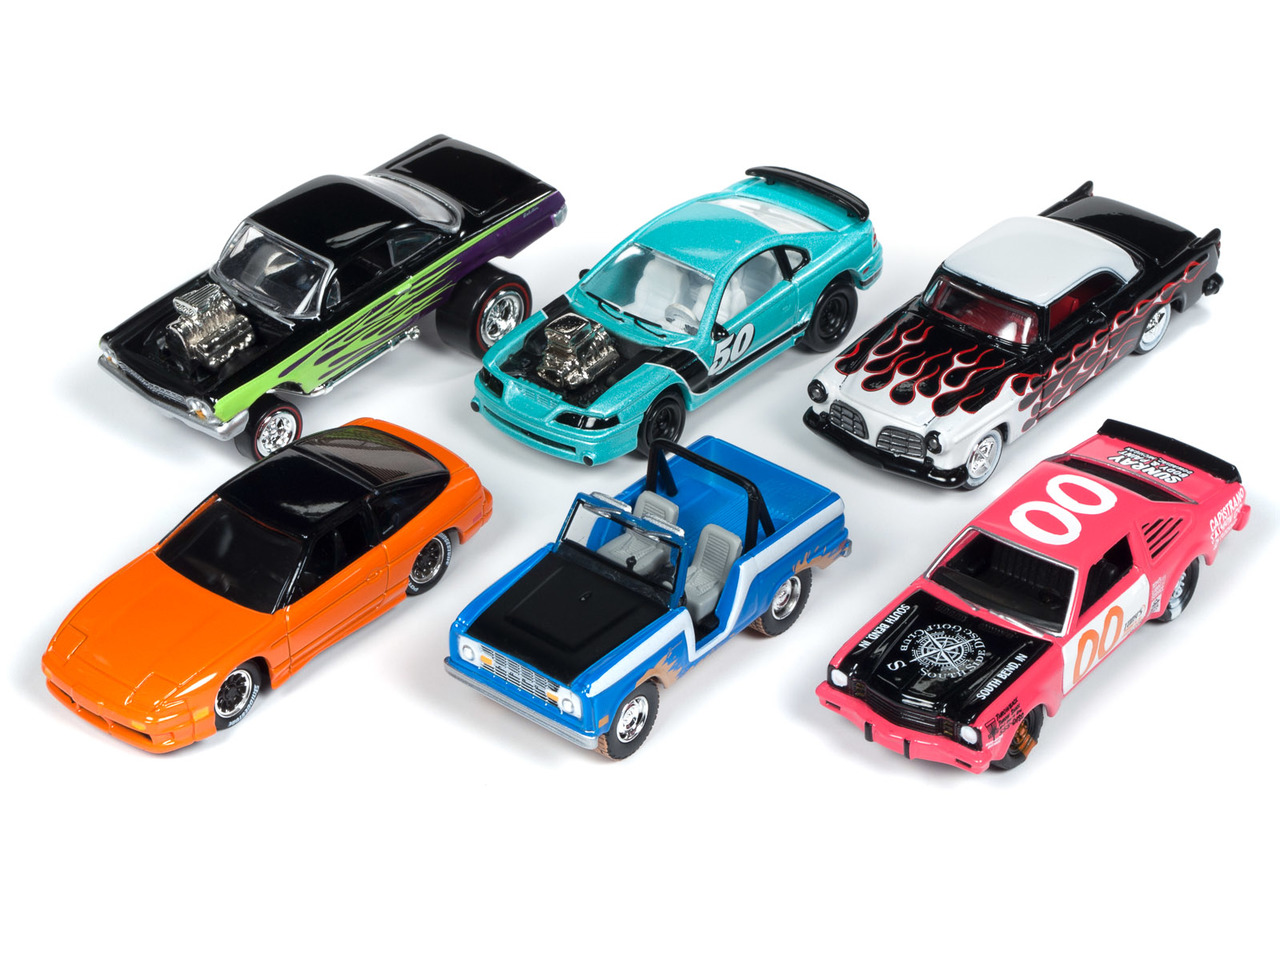 "Street Freaks" 2019 Release 1 Set A of 6 Cars Limited Edition to 3000 pieces Worldwide 1/64 Diecast Models by Johnny Lightning